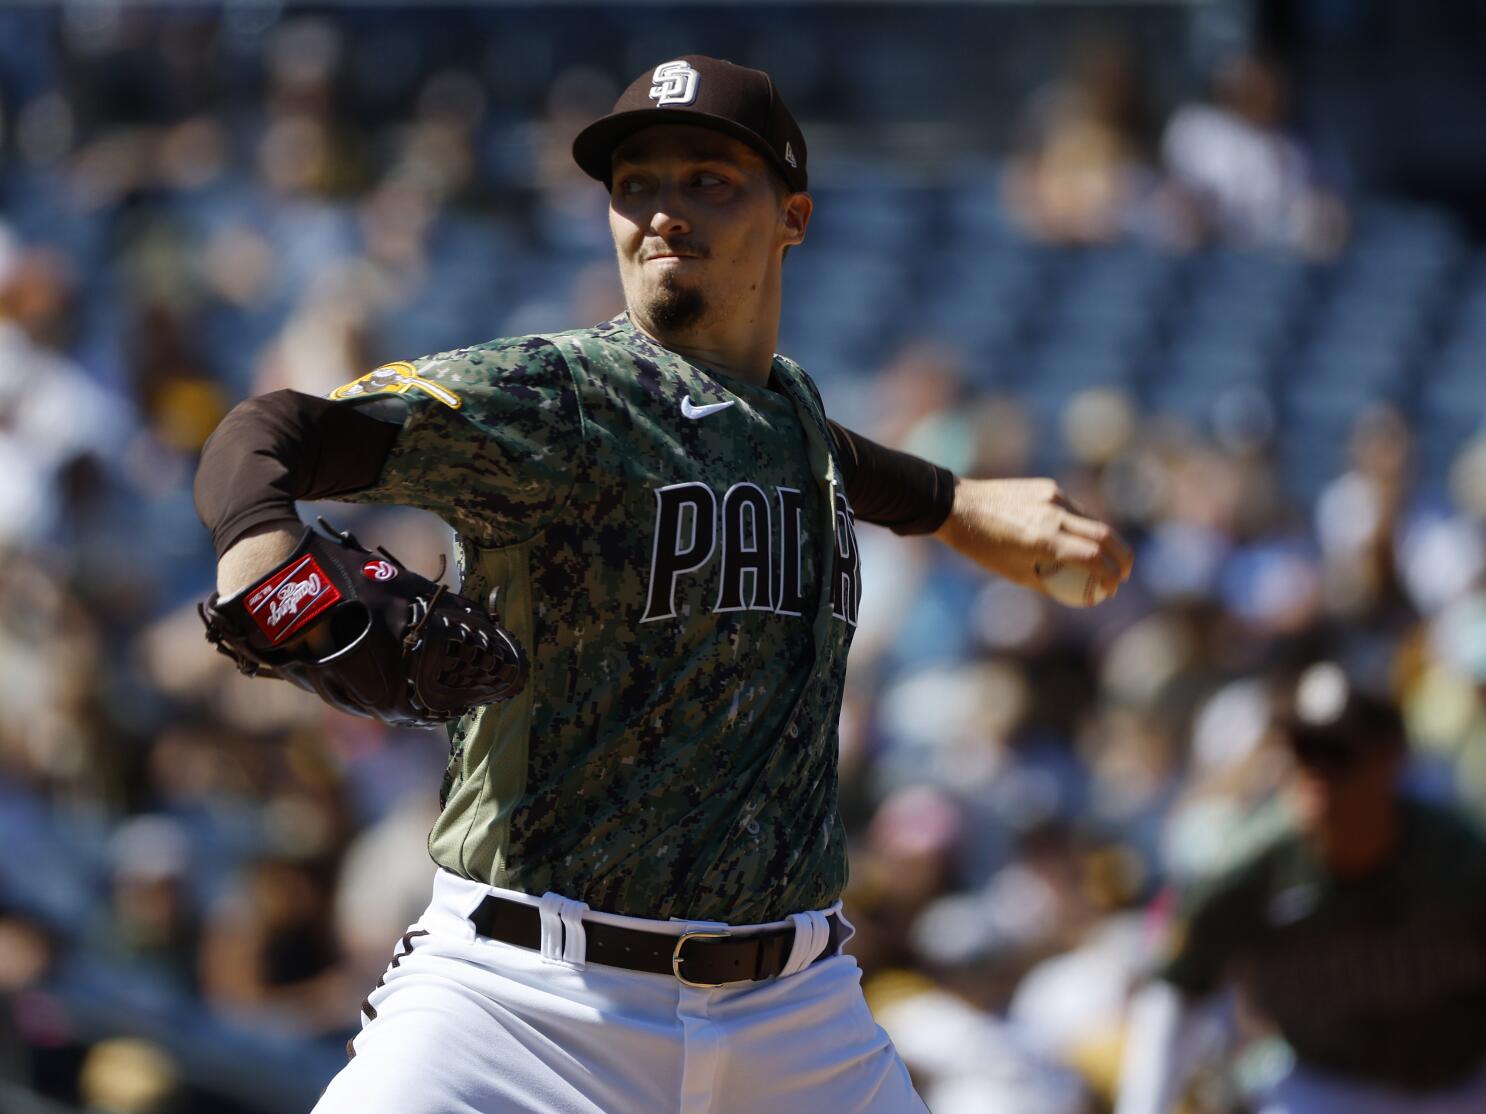 Again, Blake Snell plenty good enough to win in Padres loss - The